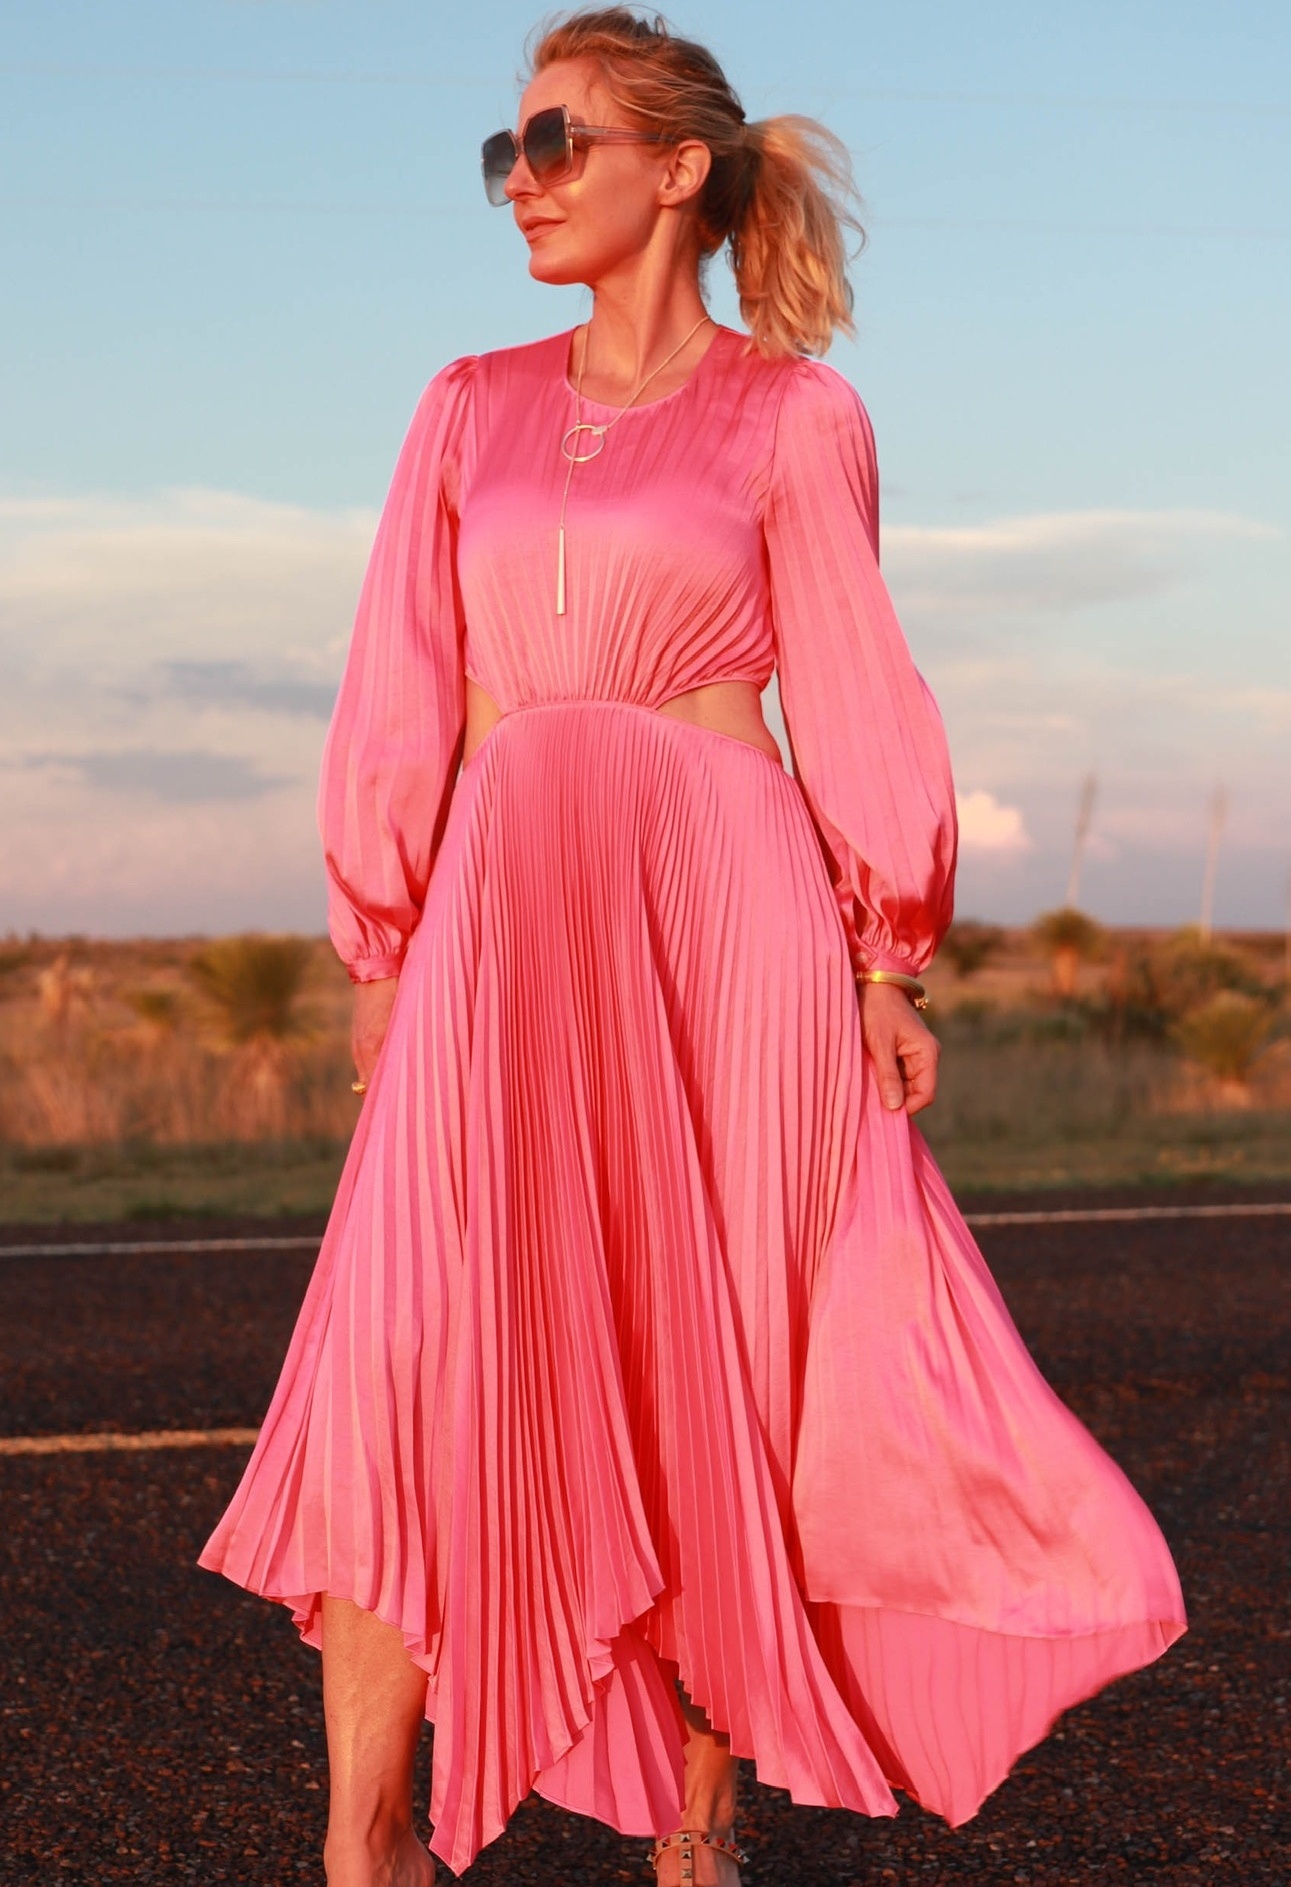 ALC pink pleated dress midi length with cutouts and sleeves on fashion over 40 blogger Erin Busbee